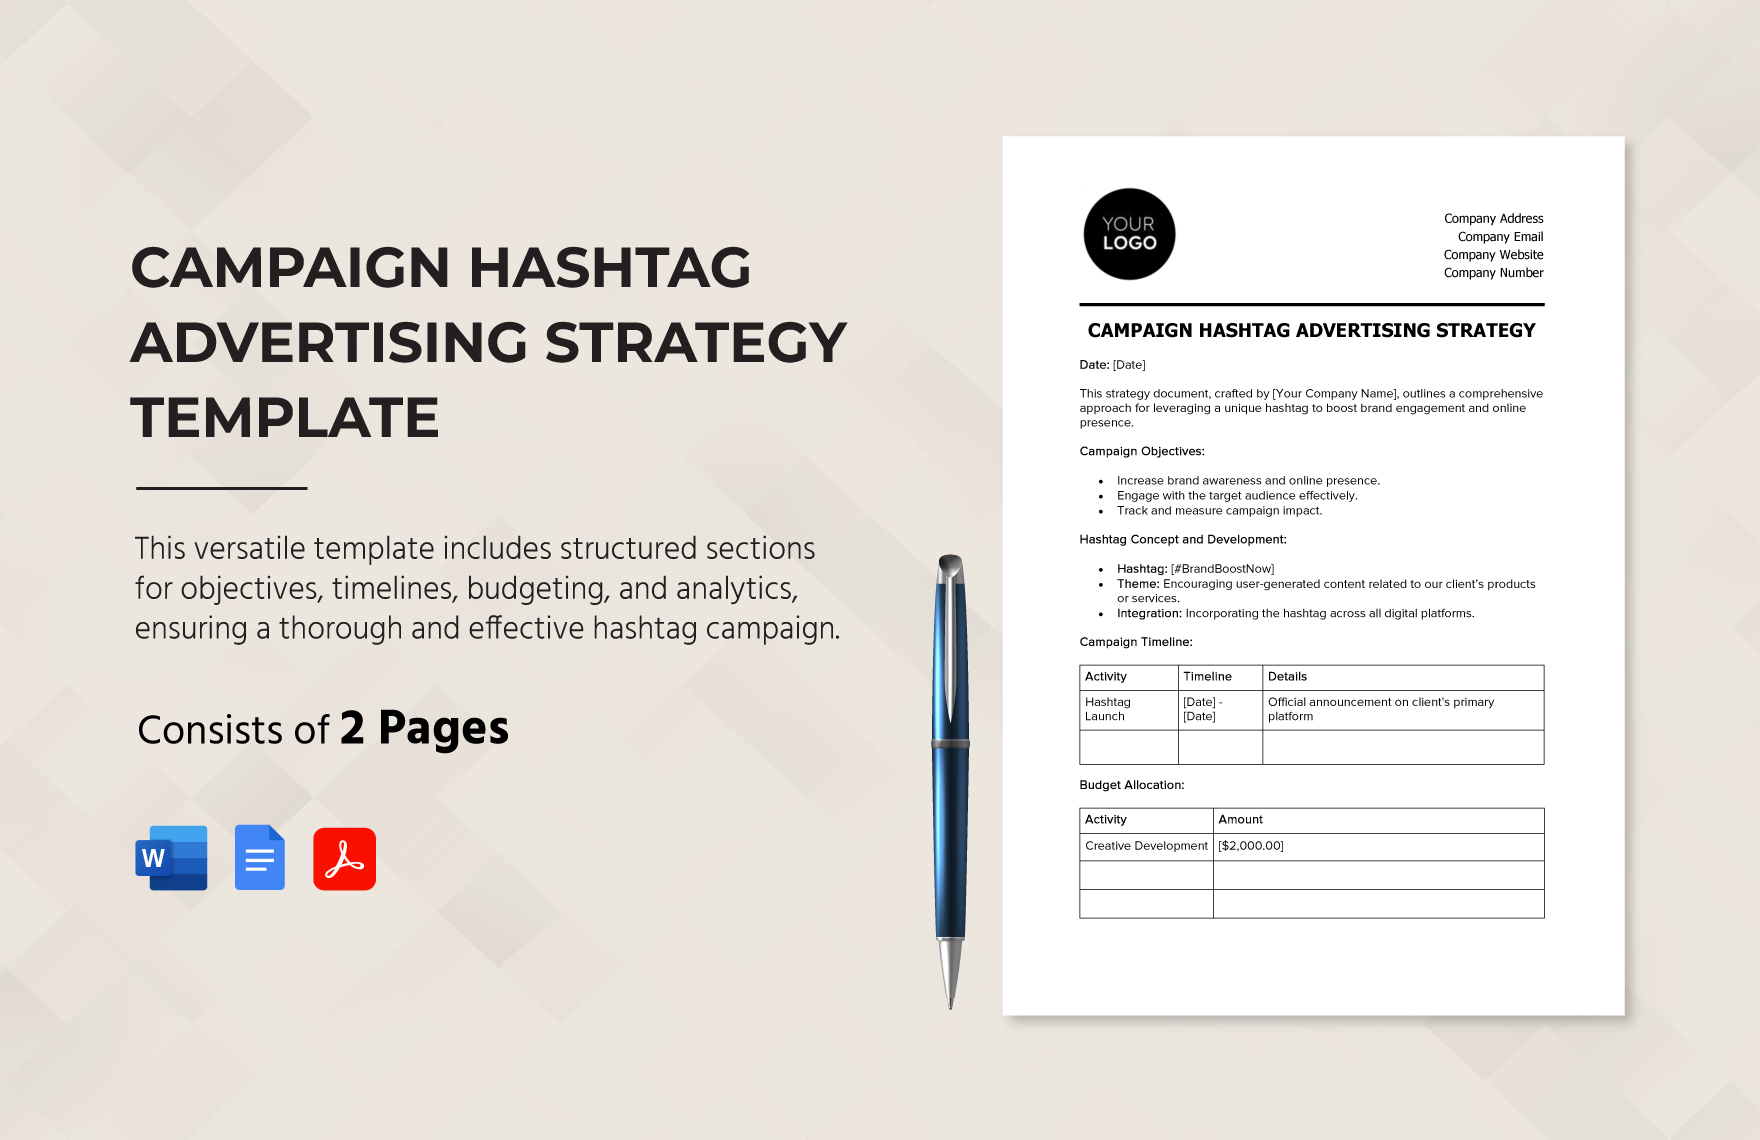 Campaign Hashtag Advertising Strategy Template in Word, Google Docs, PDF